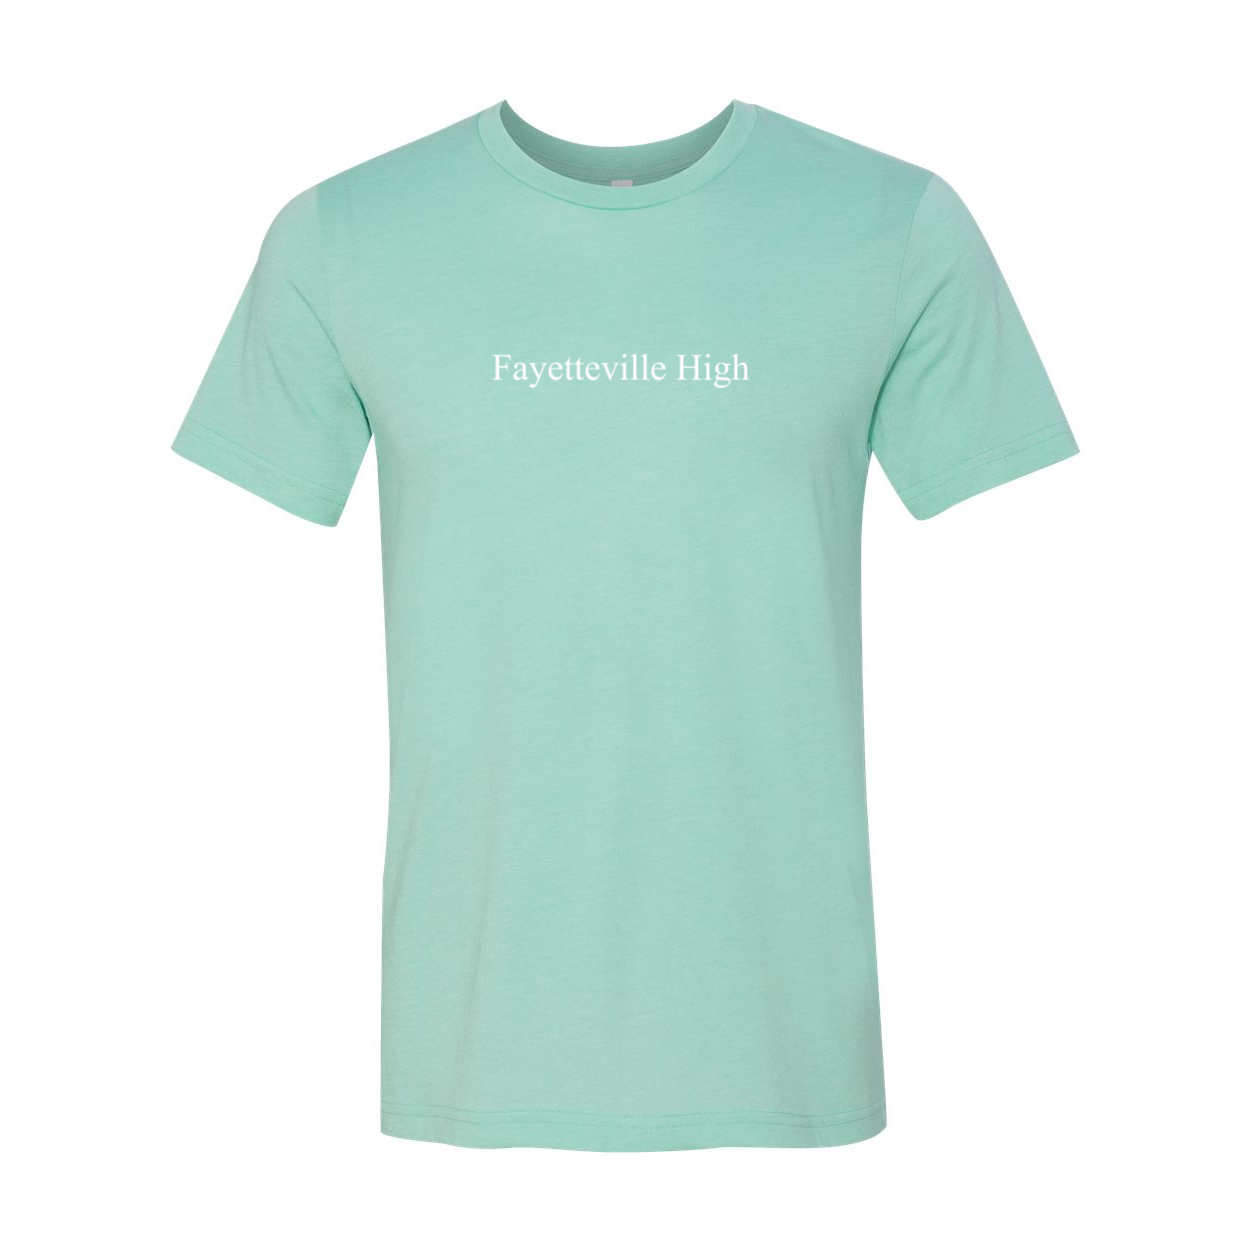 Fayetteville High Soft Tee